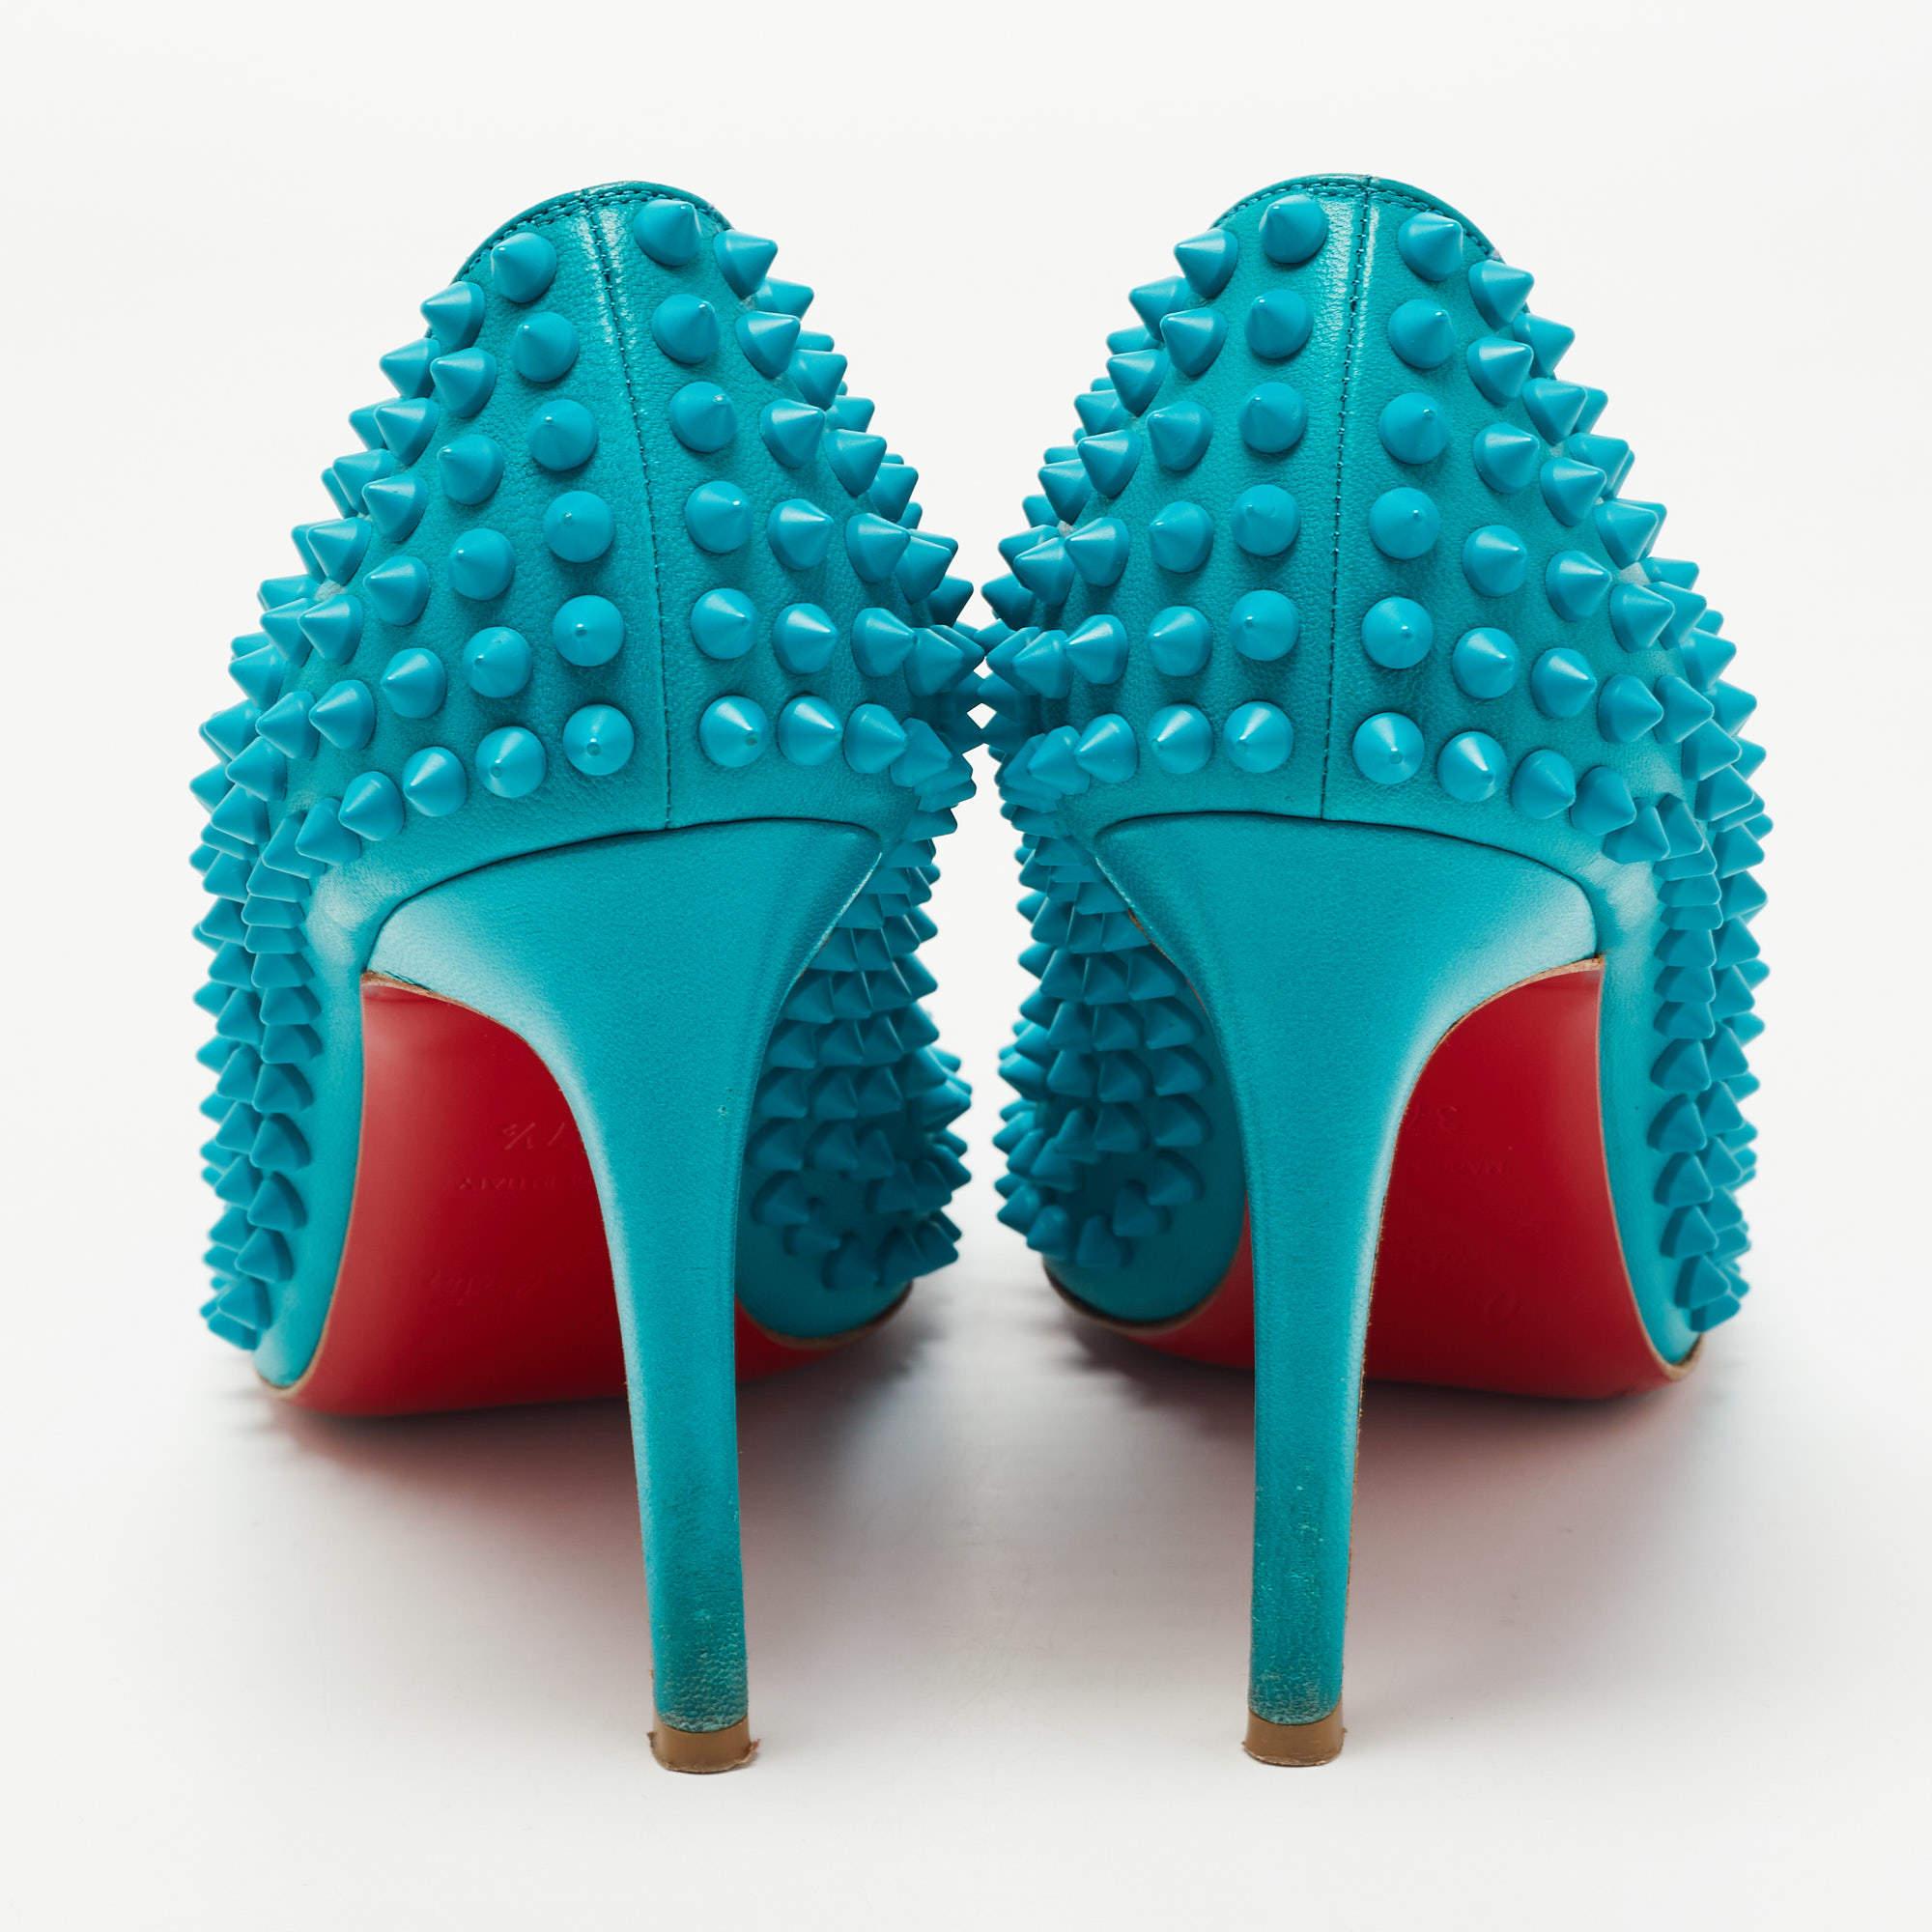 Christian Louboutin Blue Leather Pigalle Spikes Pumps Size 37.5 In Good Condition For Sale In Dubai, Al Qouz 2